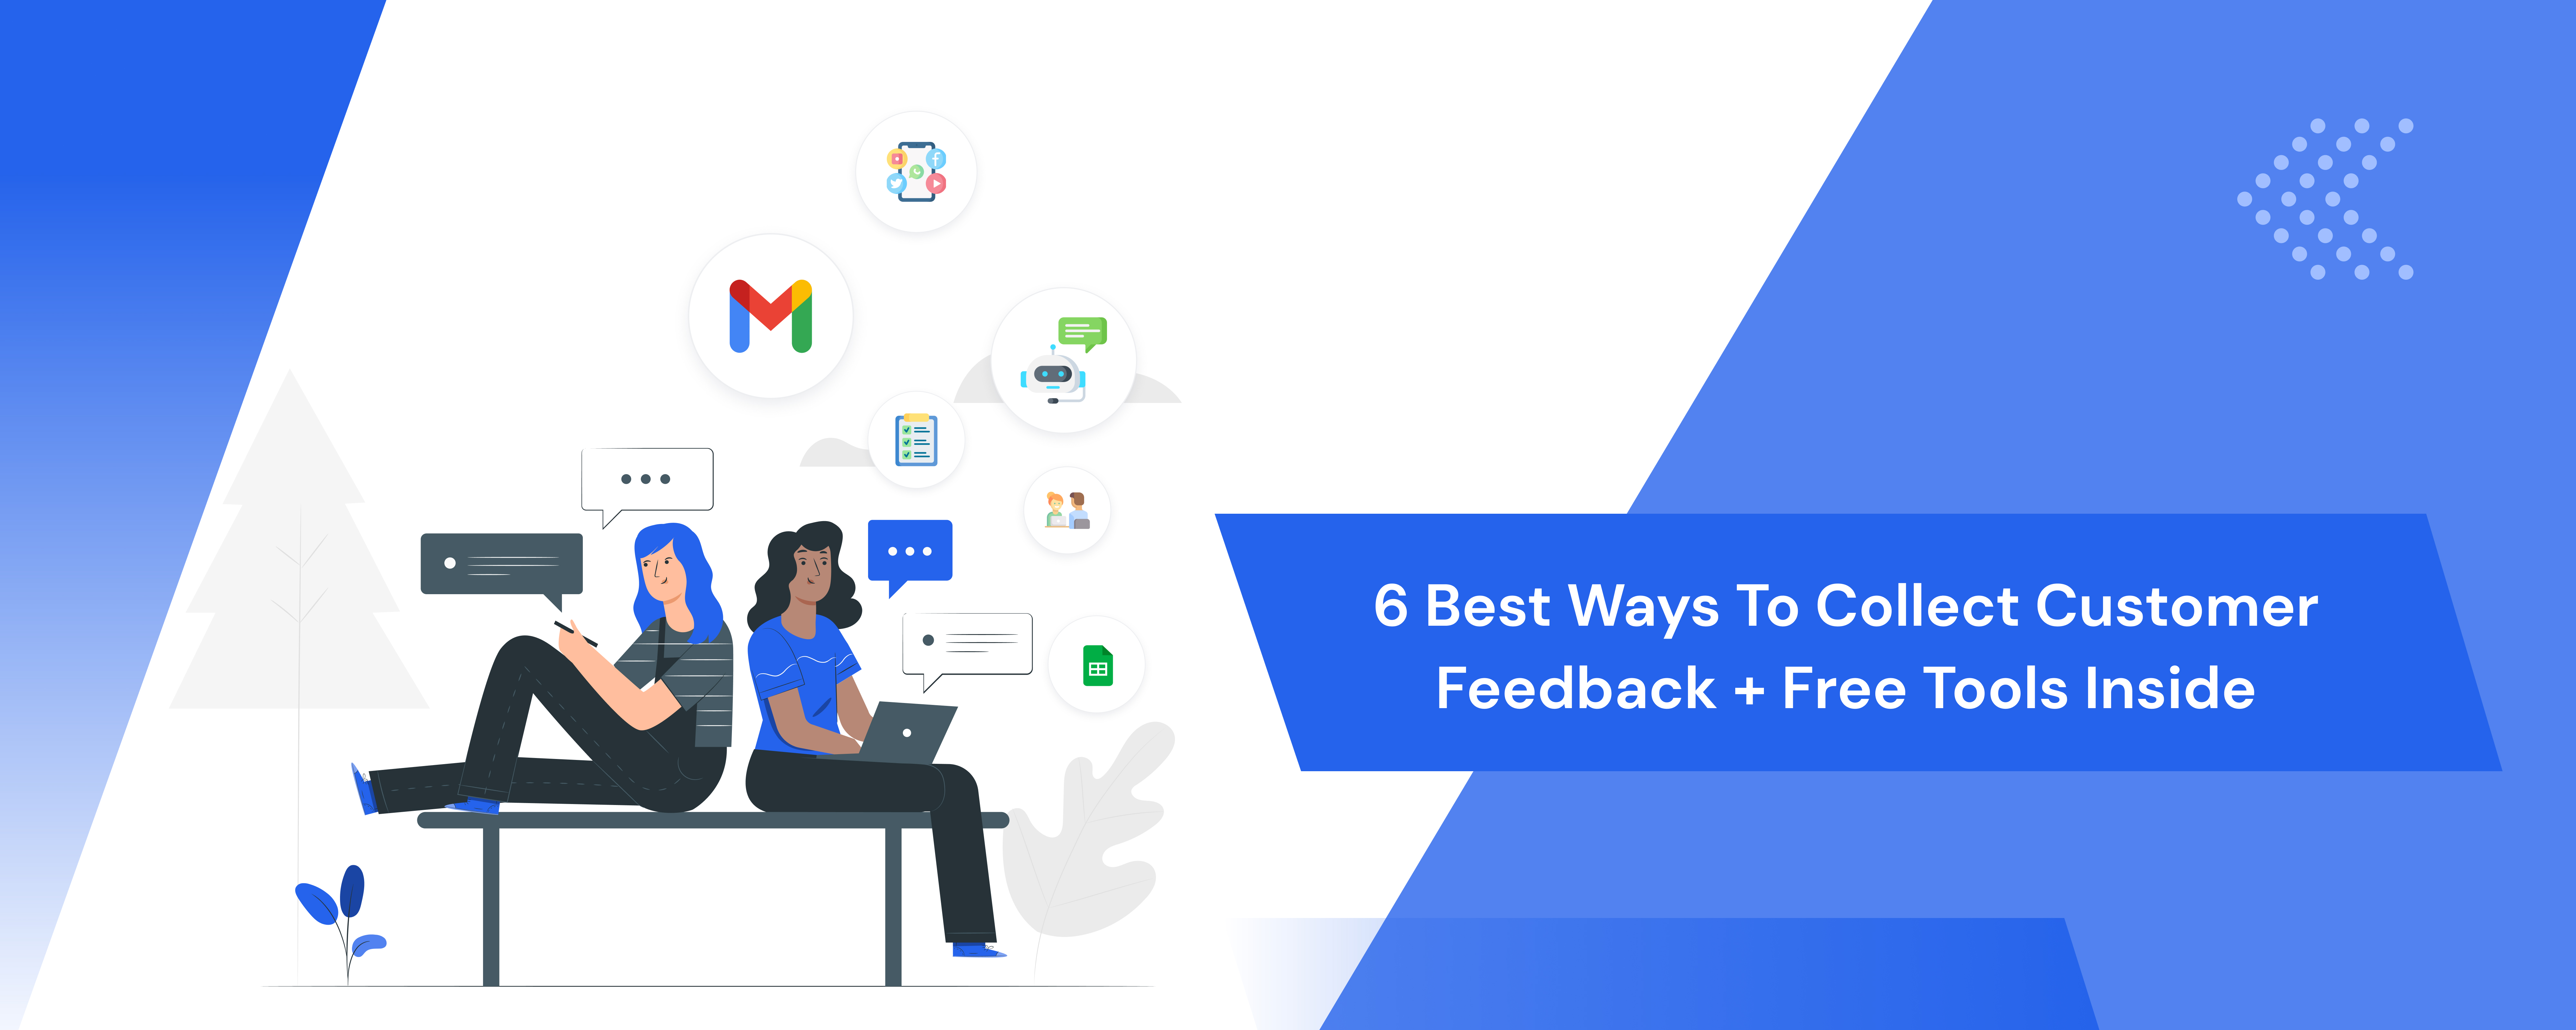 6 Best Ways to Collect Customer Feedback + FREE Tools Inside